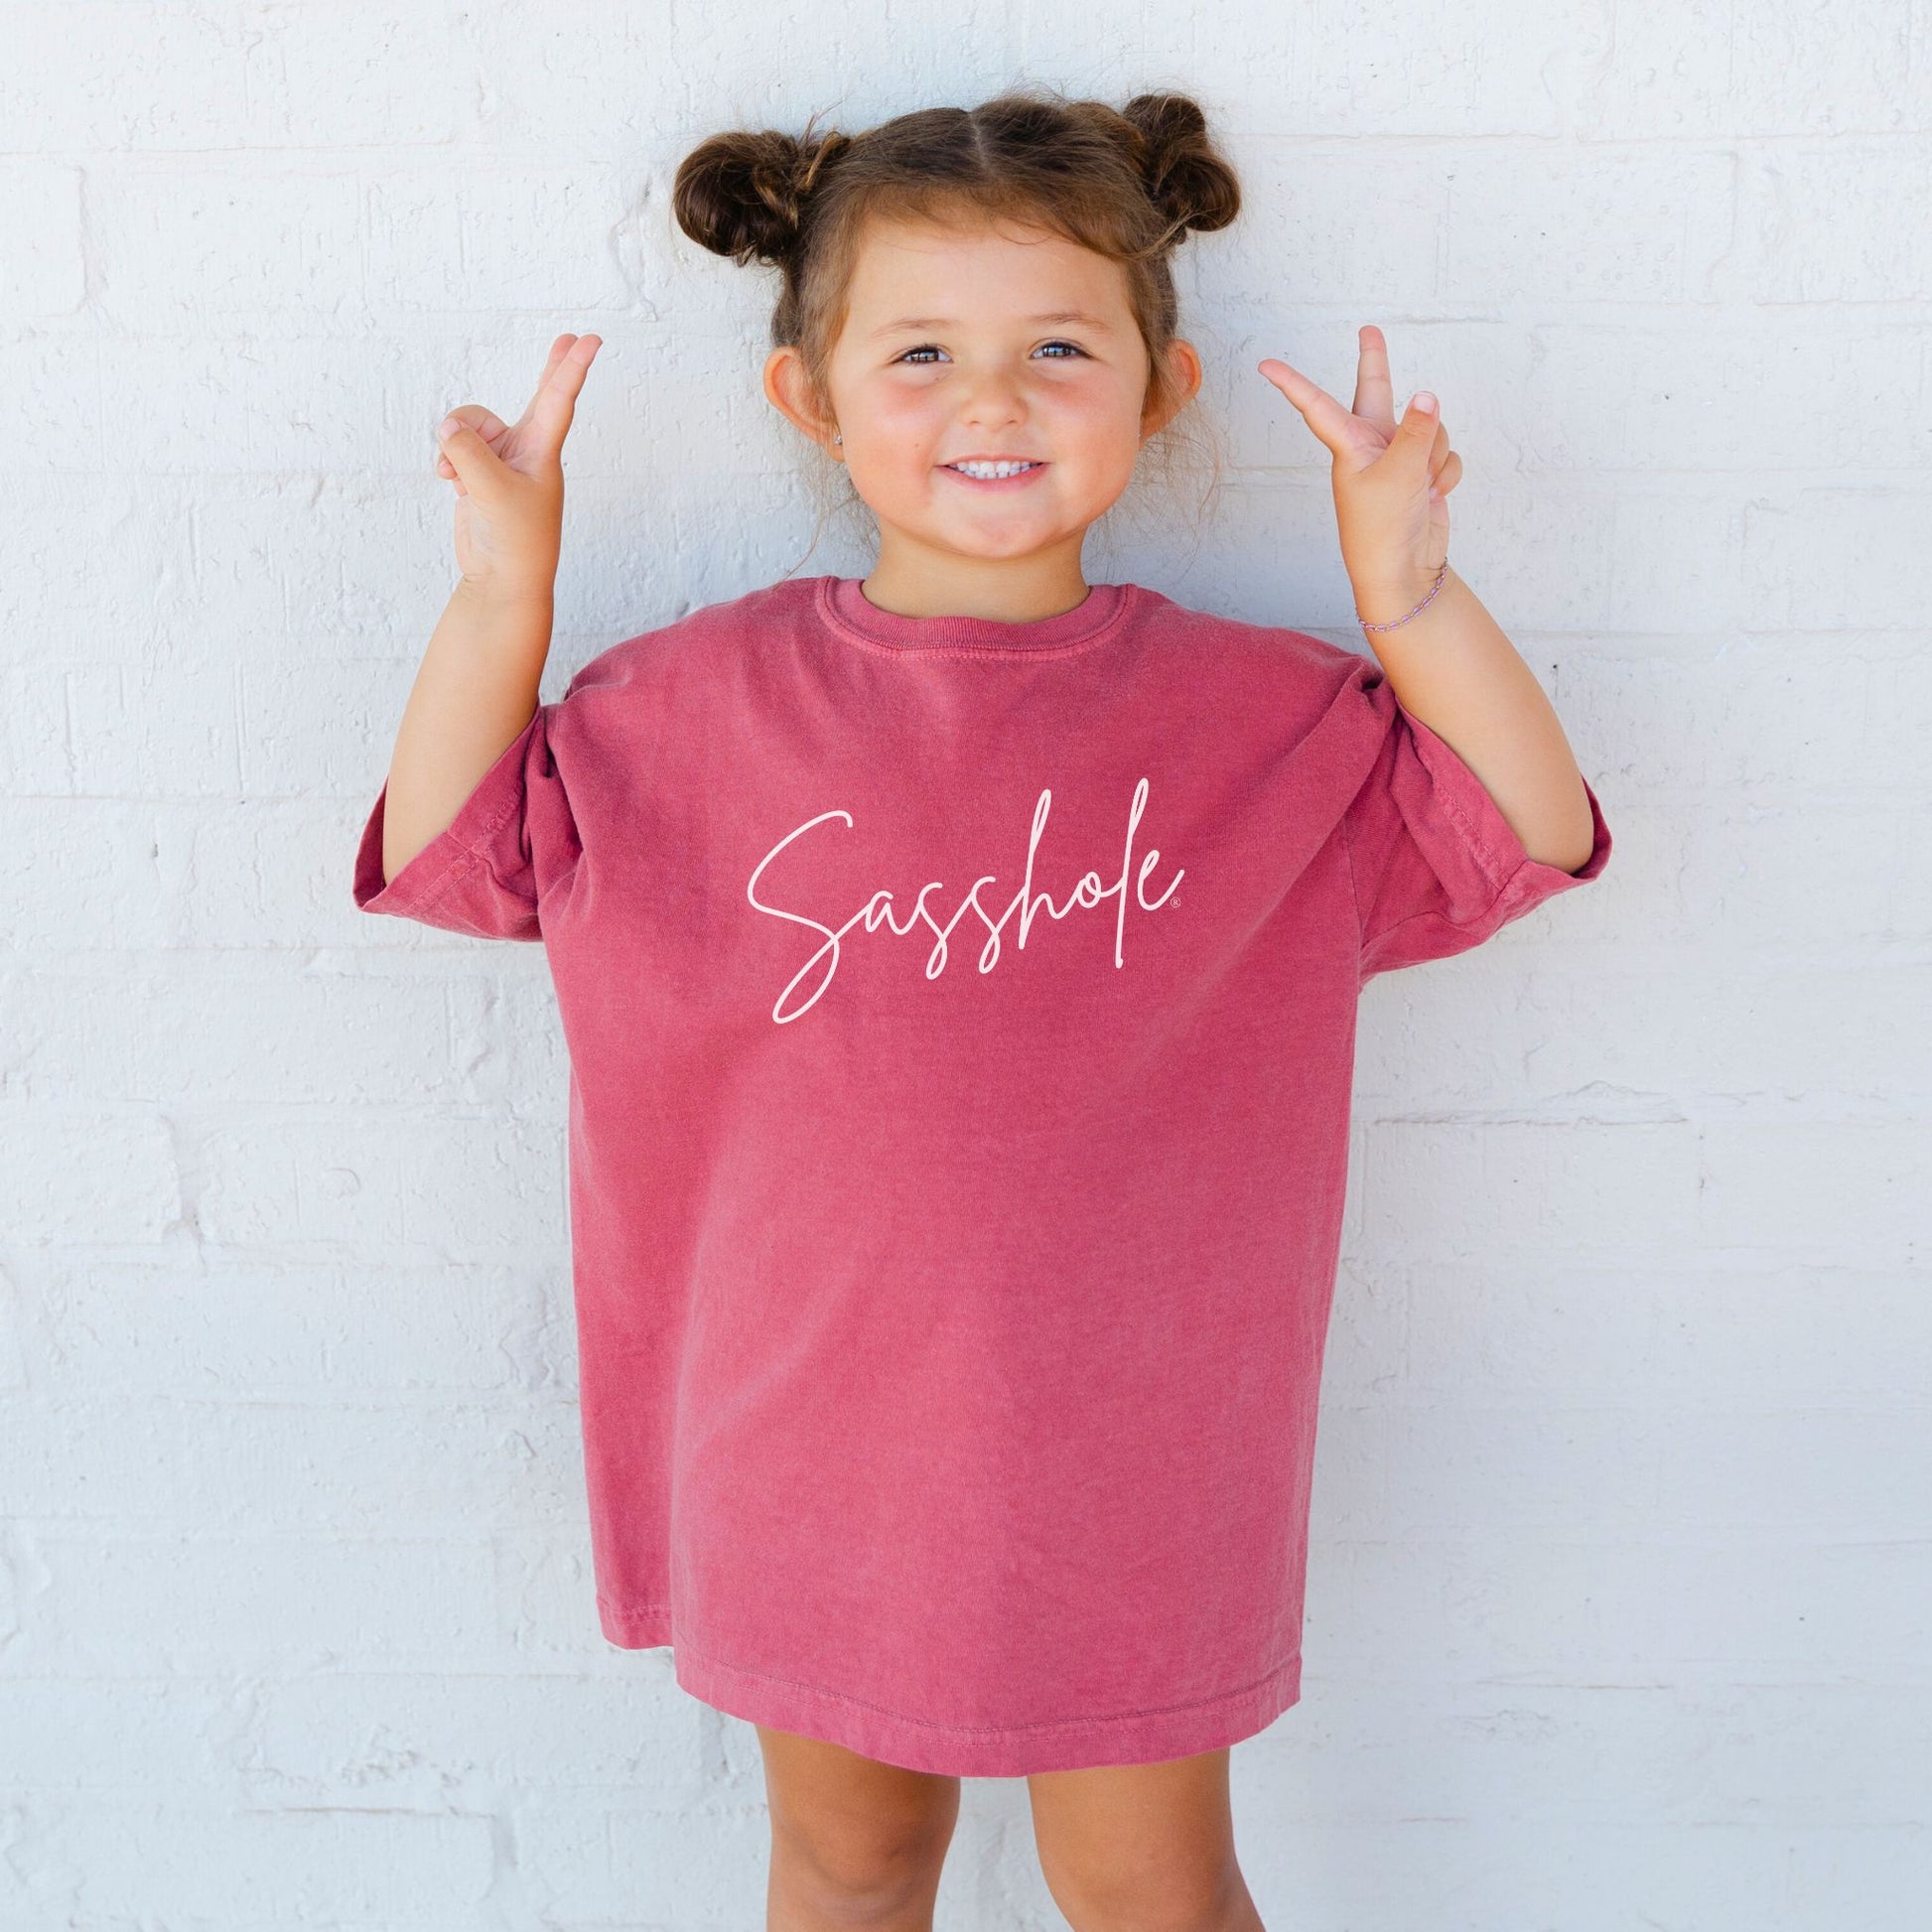 youth girls t-shirt, youth girl casual wear, youth clothing variety, youth clothing essentials, whimsical graphic design, vibrant youth styles, vibrant youth apparel, Unisex, unique kids clothing, unique graphic print style, trendy graphic print fashion, trendy children's apparel, toddler girl statement tee, T-shirts, stylish toddler outfit, stylish graphic tee for girls, statement tee for girls, sassy youth fashion, sassy slogan tee